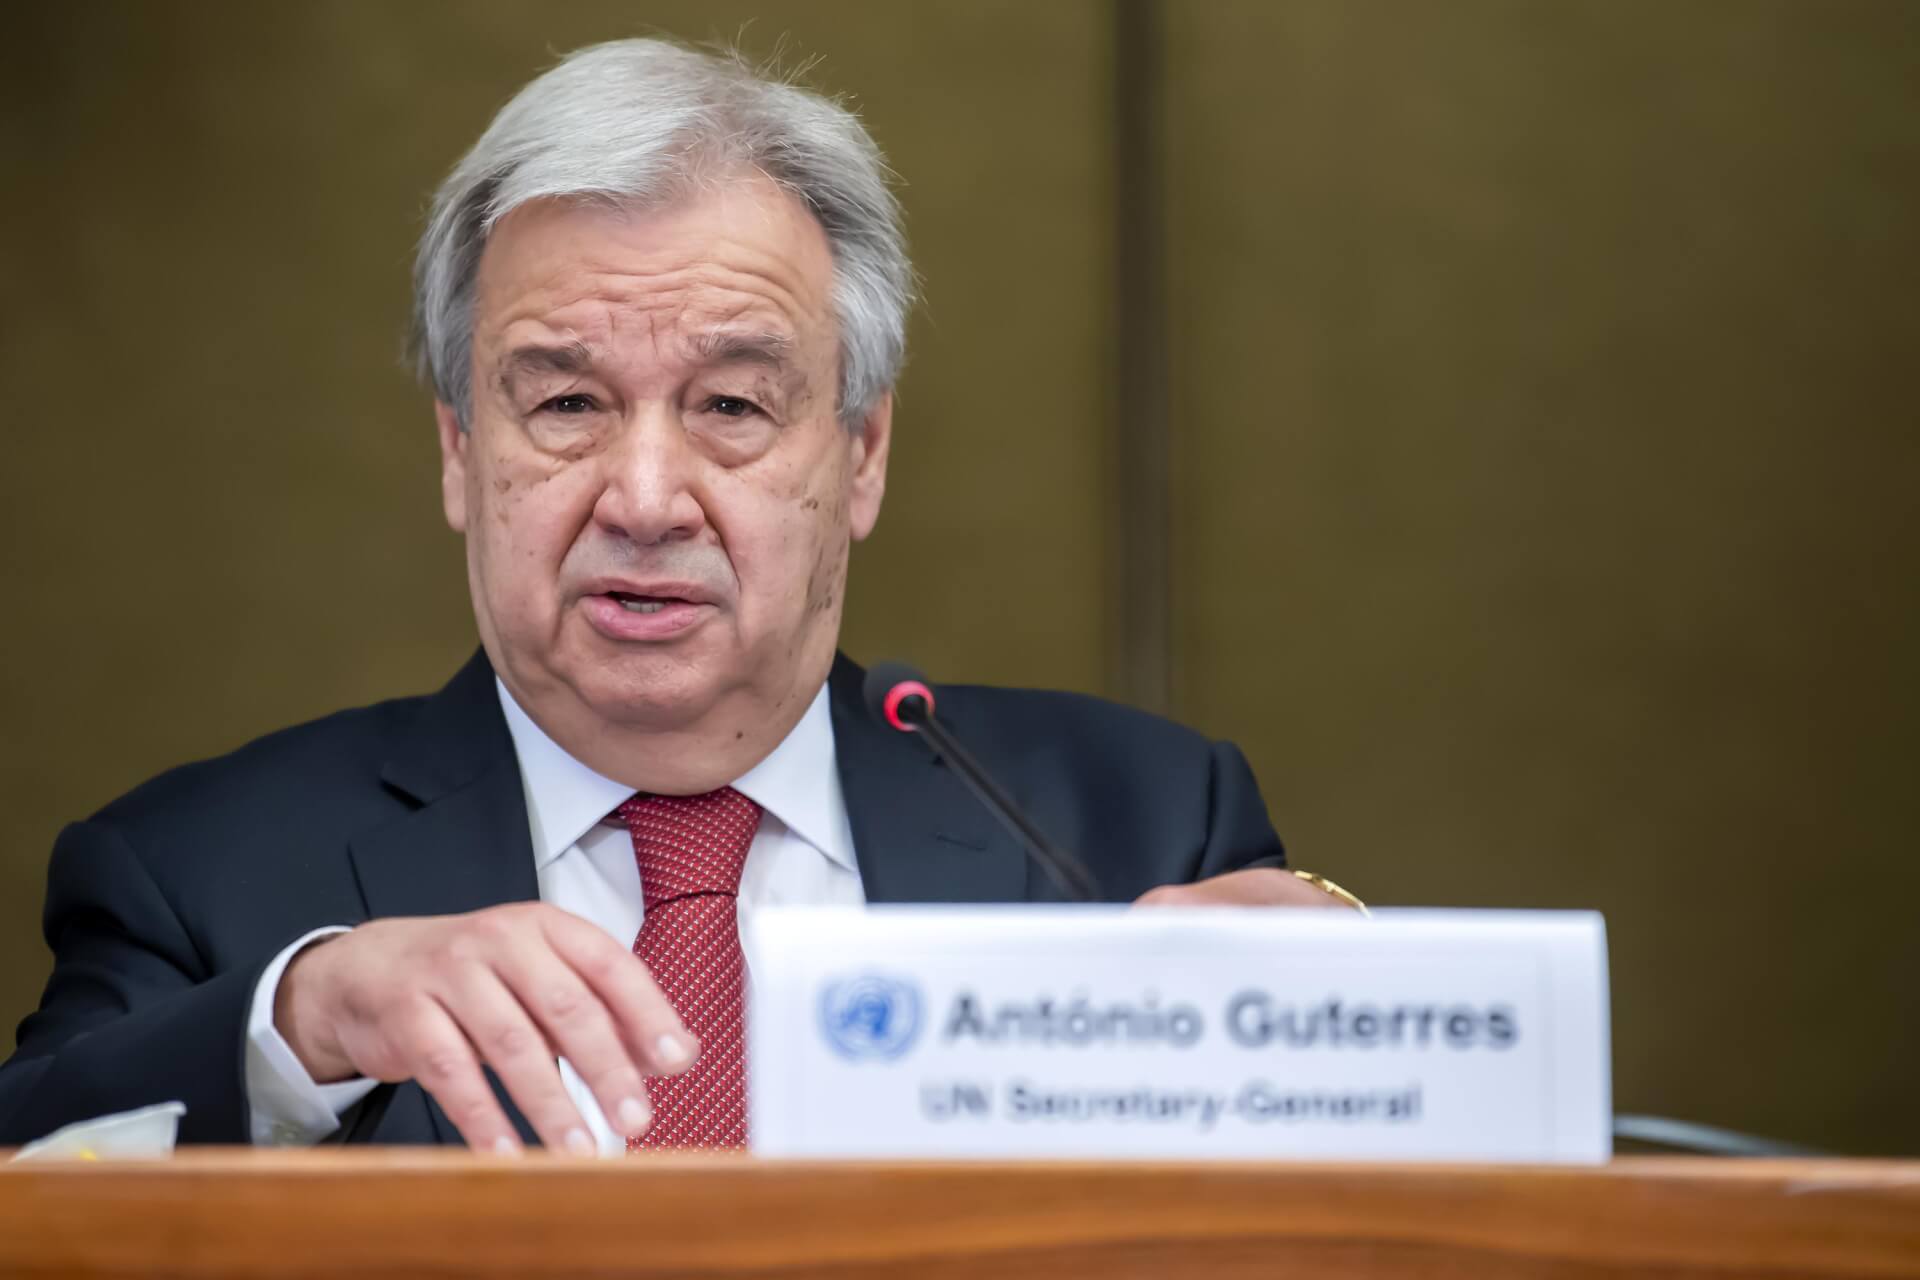 UN Sec-Gen Guterres Begins 2nd Term, Urges World to Make 2022 a “Year of Recovery”